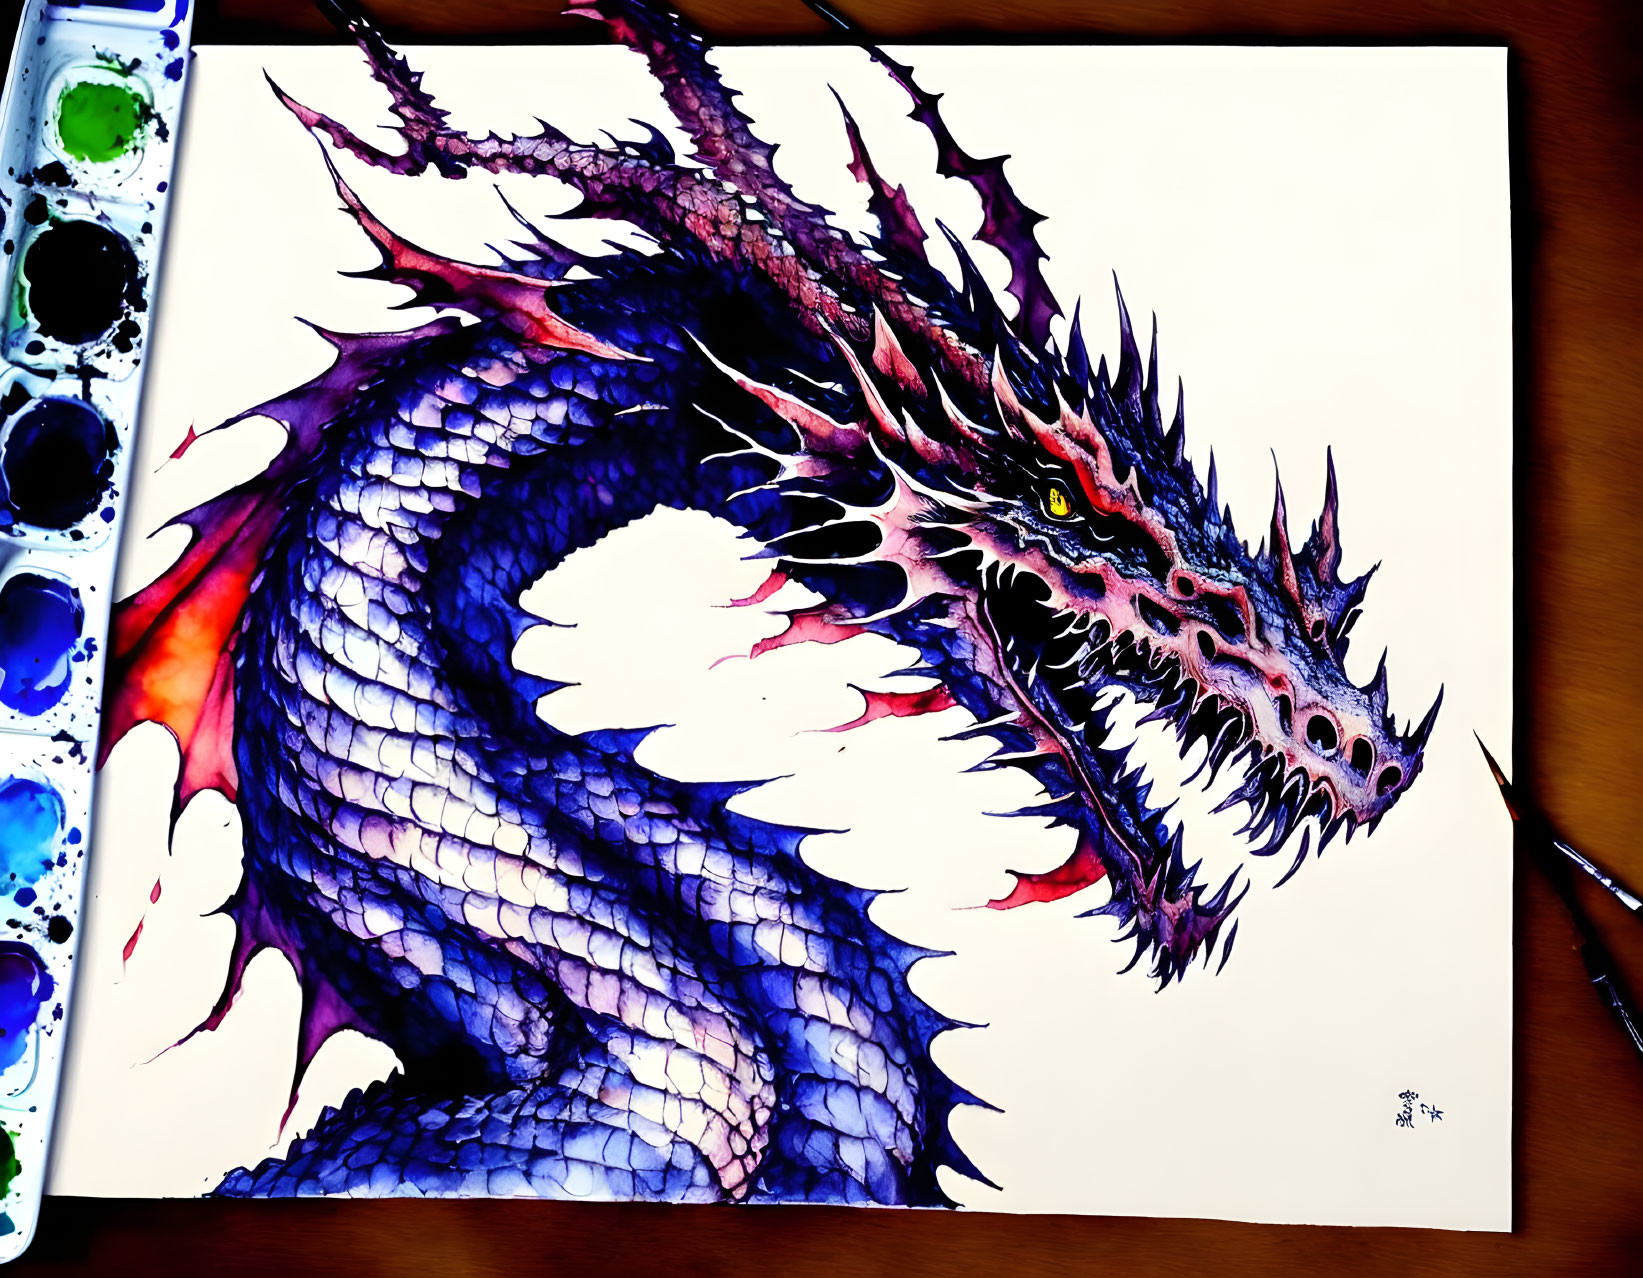 Colorful hand-painted dragon with detailed scales next to watercolor palette and brush